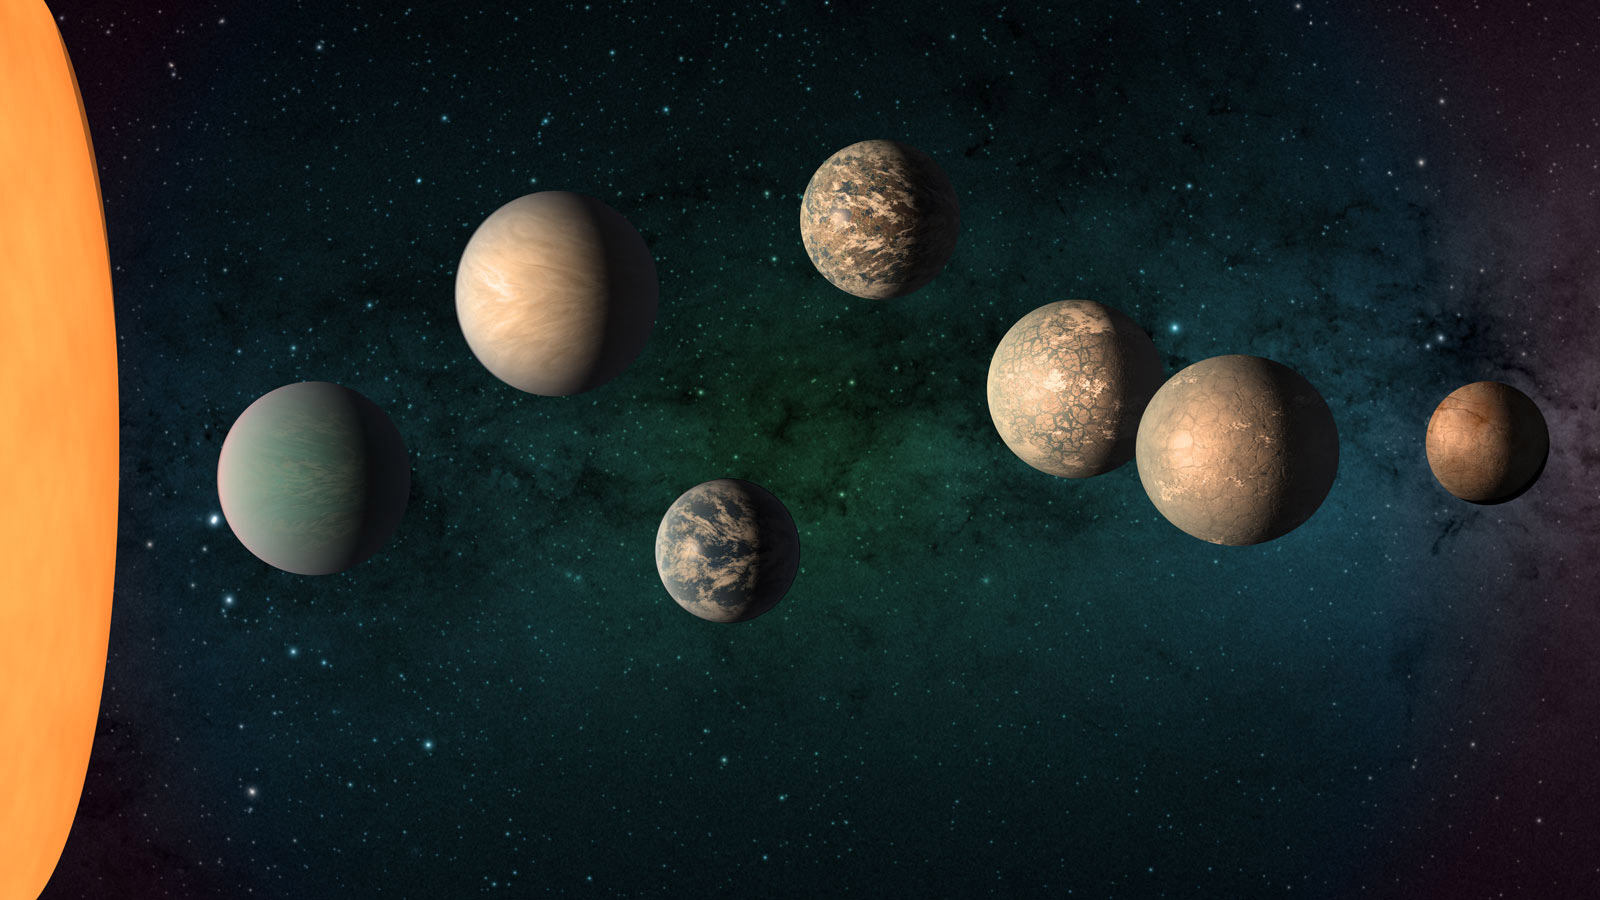 The TRAPPIST-1 star, an M dwarf, is seen to the left of its seven planets. It is glowing red, while the planets are about the same sizes, but their colors and surface features differ.